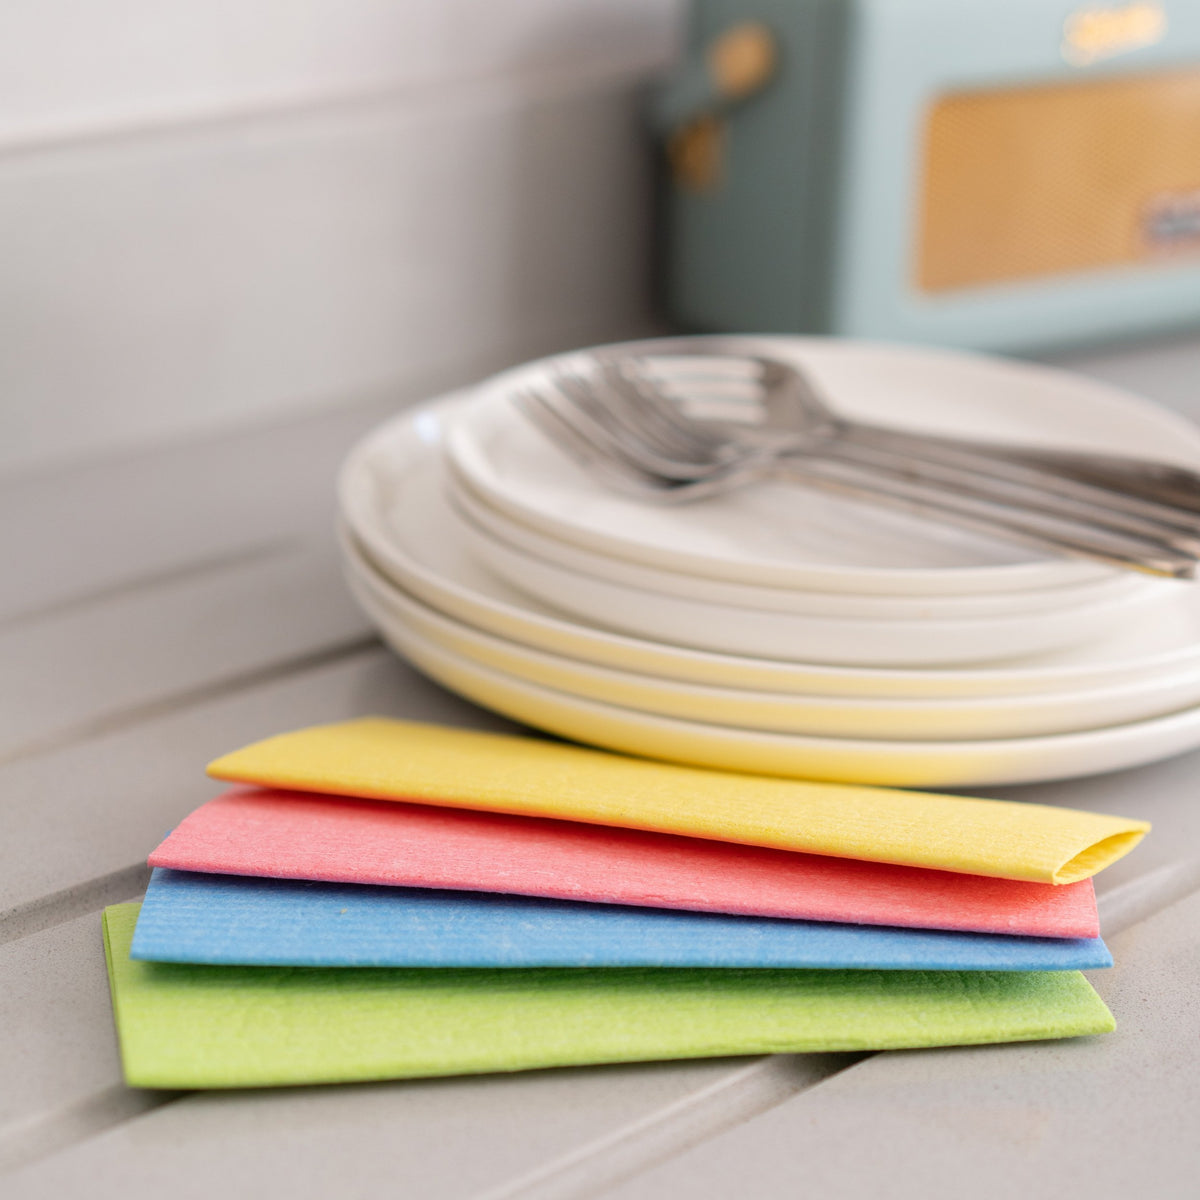 Compostable Sponge Cleaning Cloths - Rainbow | Cleaning Cloths - The Naughty Shrew